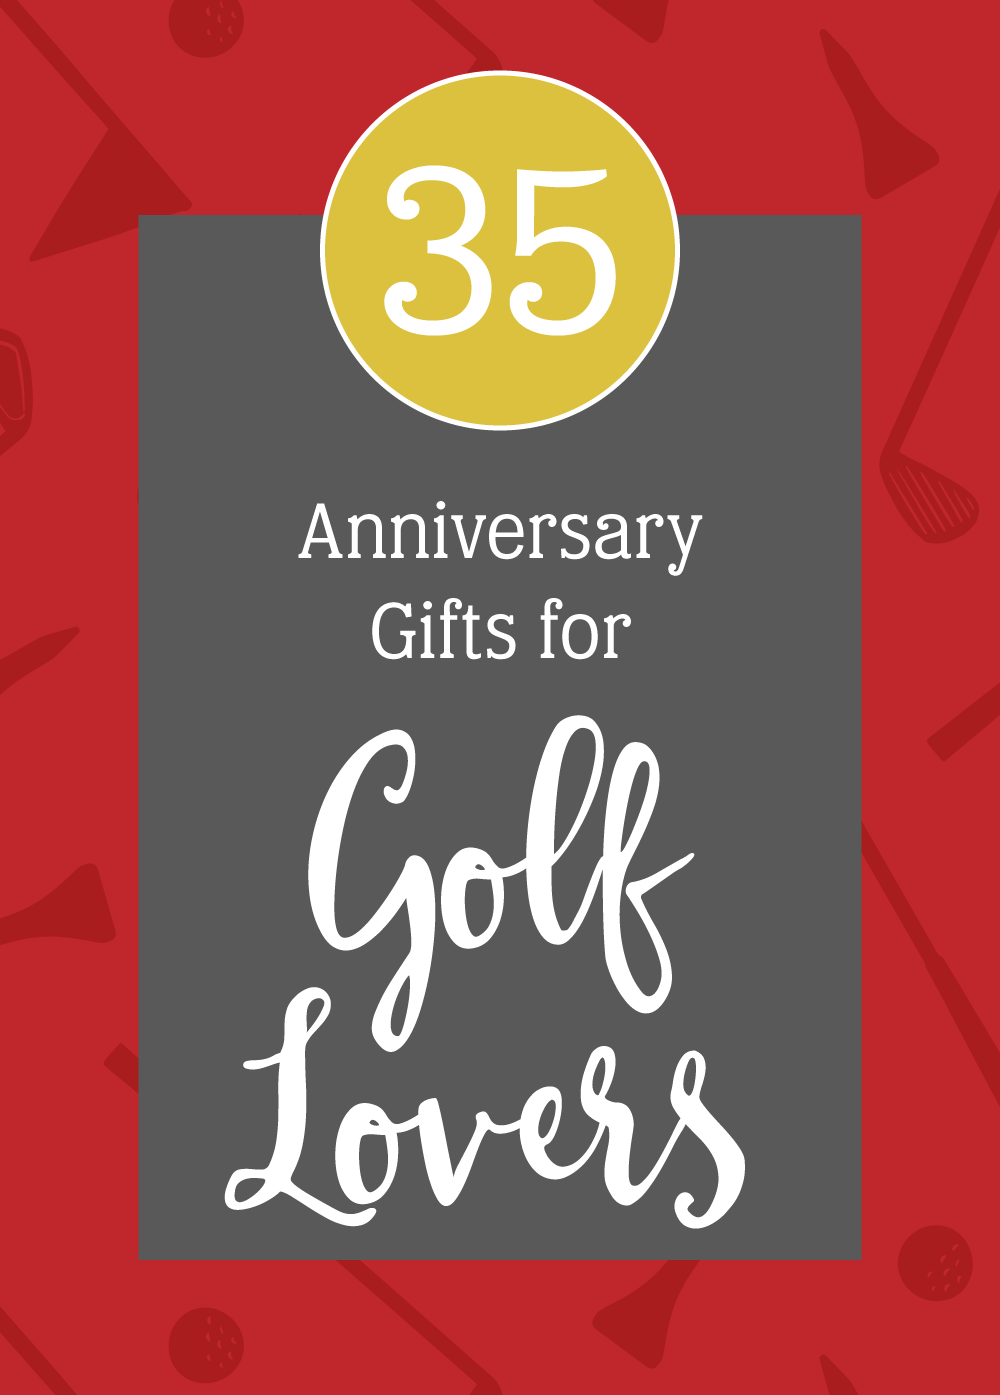 Red background with a golf themed pattern and a white text overlay that reads "35 Anniversary Gifts for Golf Lovers"